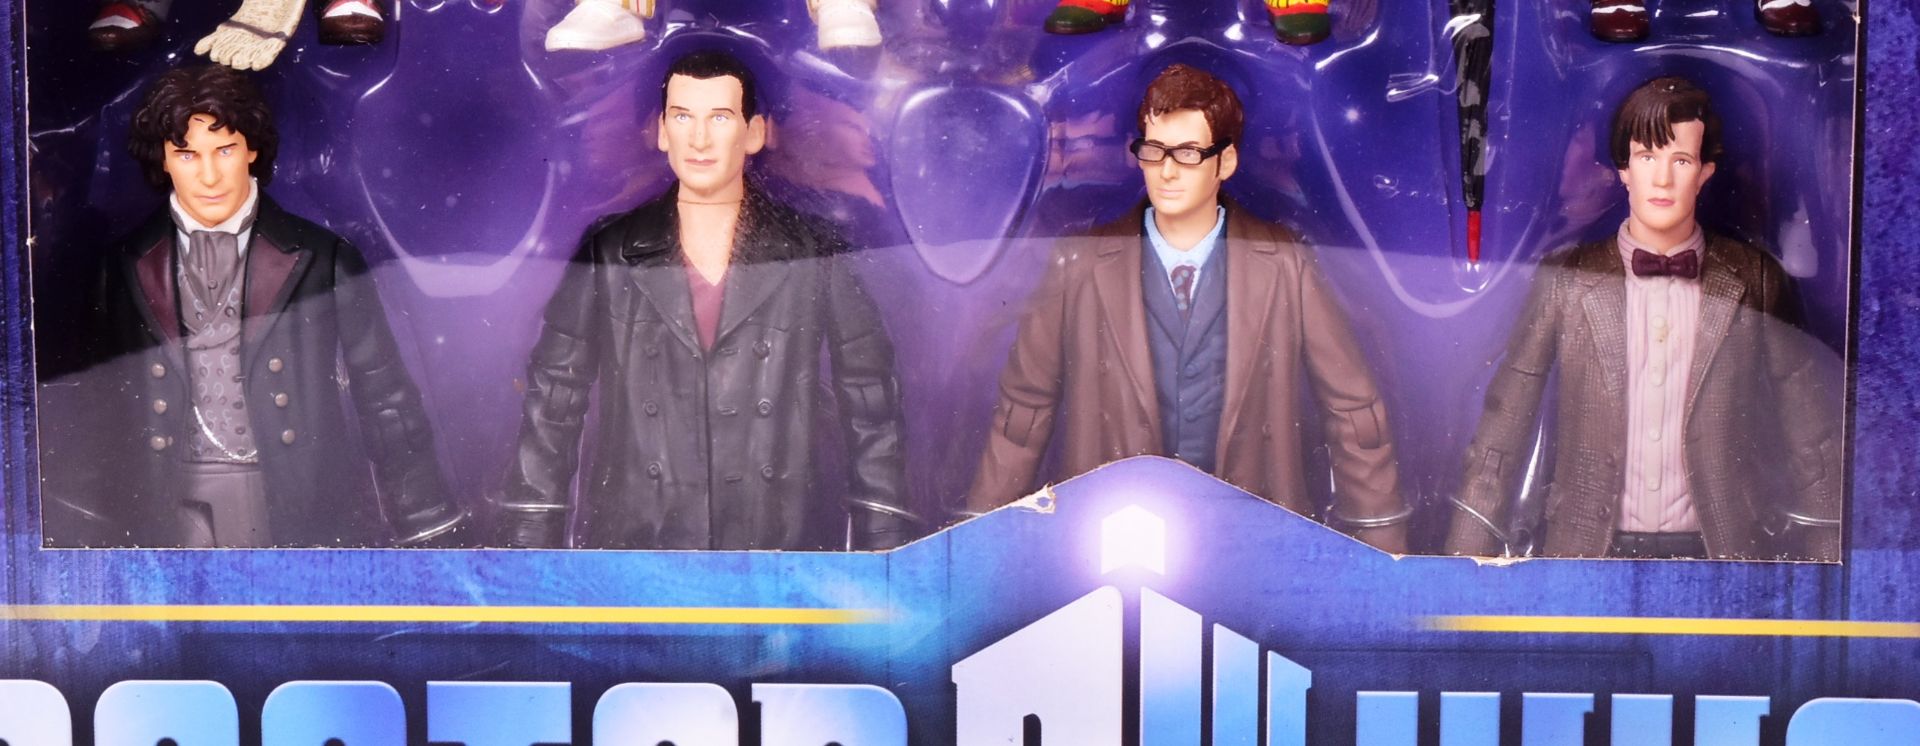 DOCTOR WHO - CHARACTER OPTIONS - ELEVEN DOCTOR FIGURE SET - Image 5 of 5